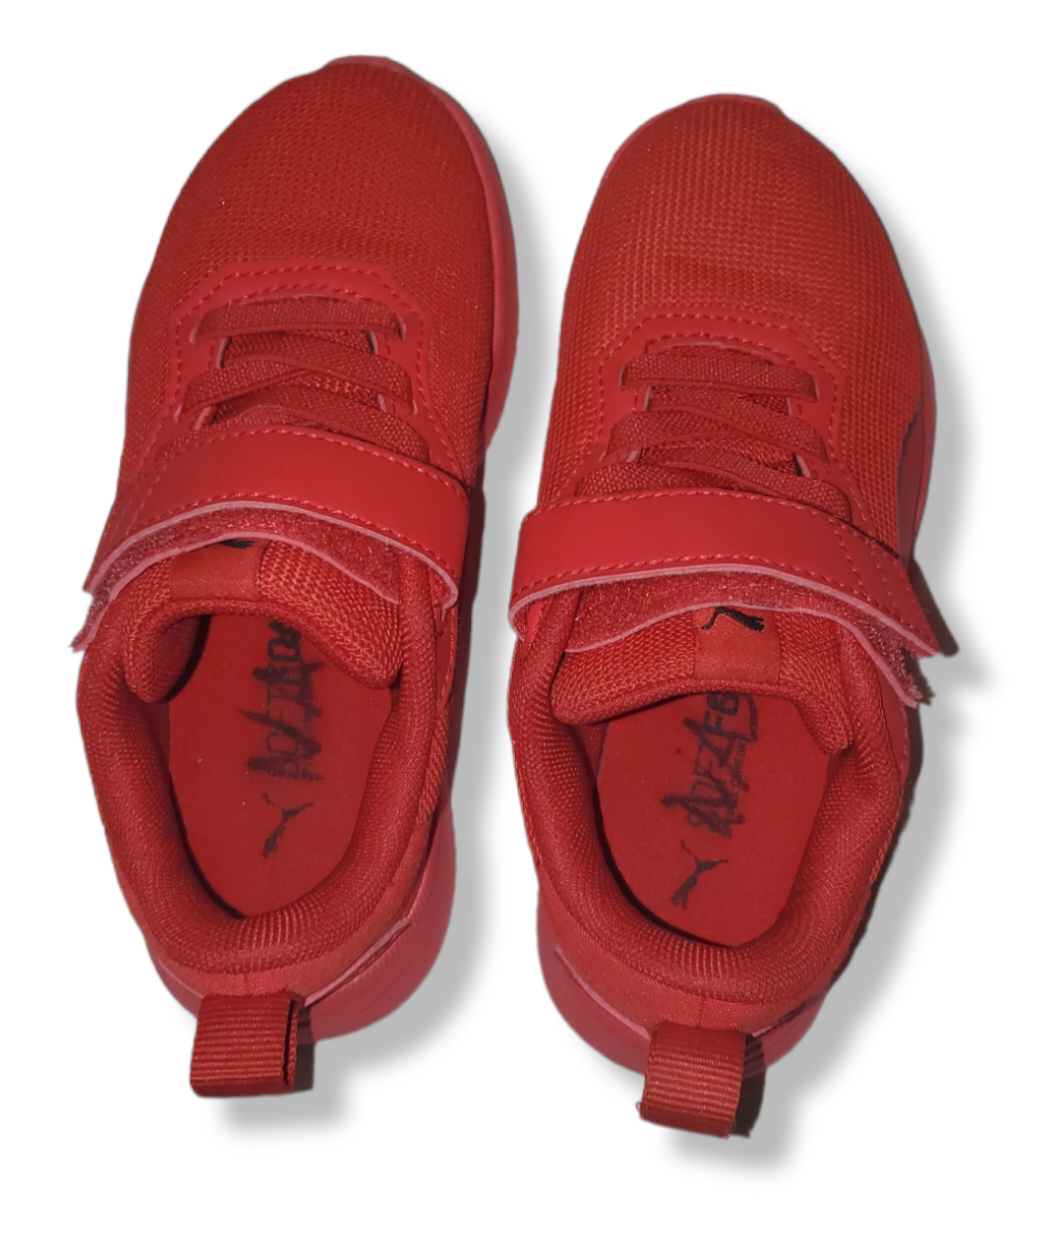 Puma Red Toddler Sneakers|Used